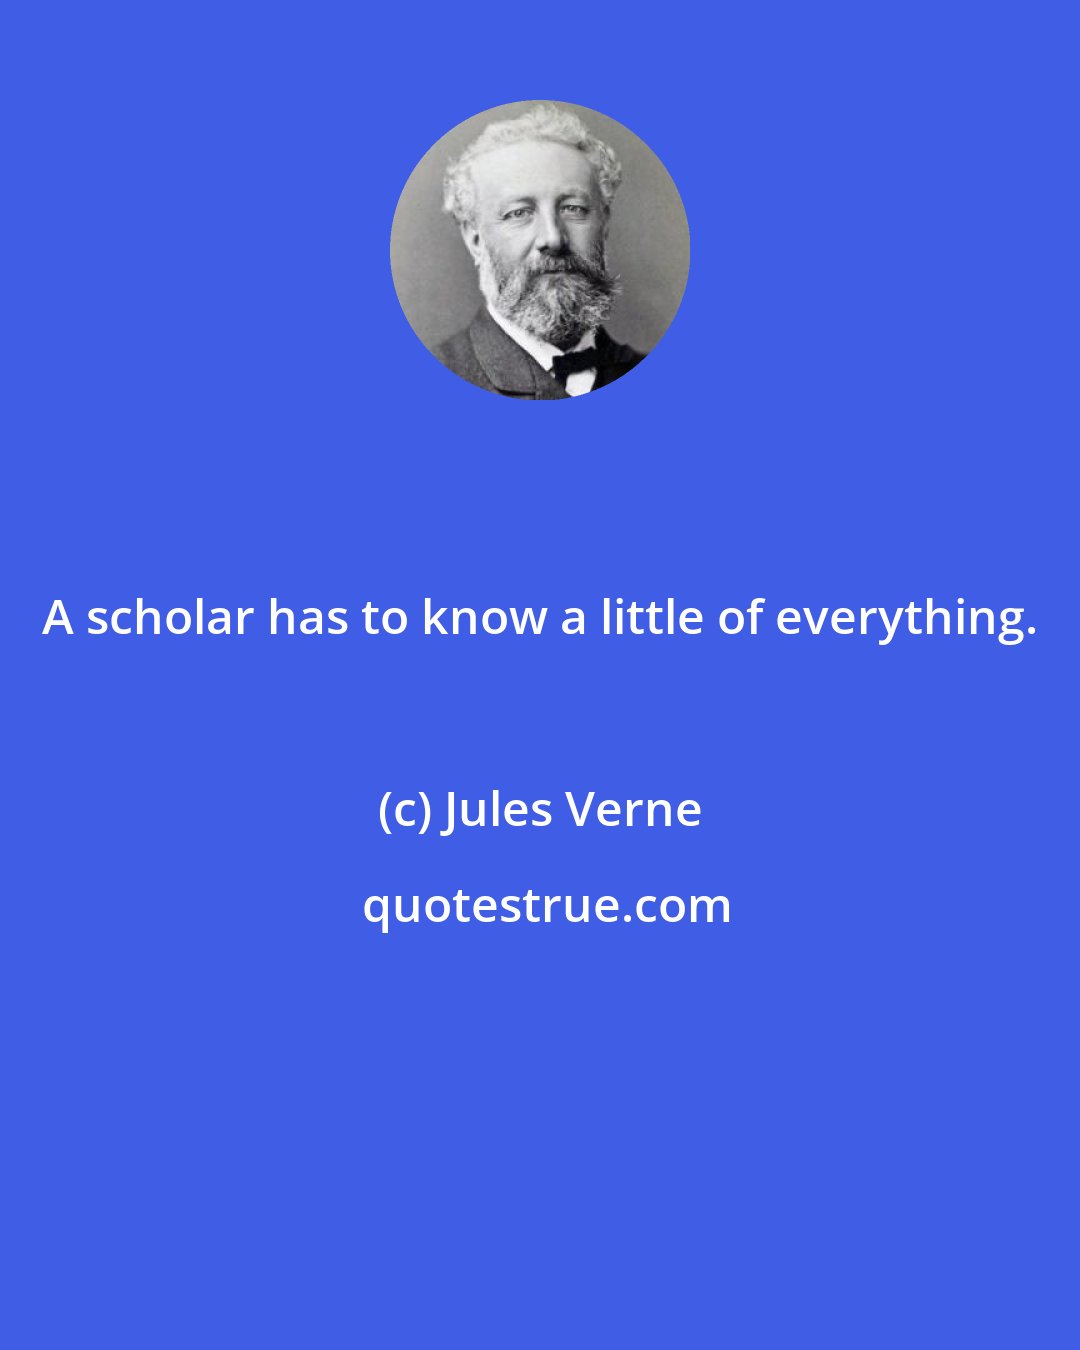 Jules Verne: A scholar has to know a little of everything.